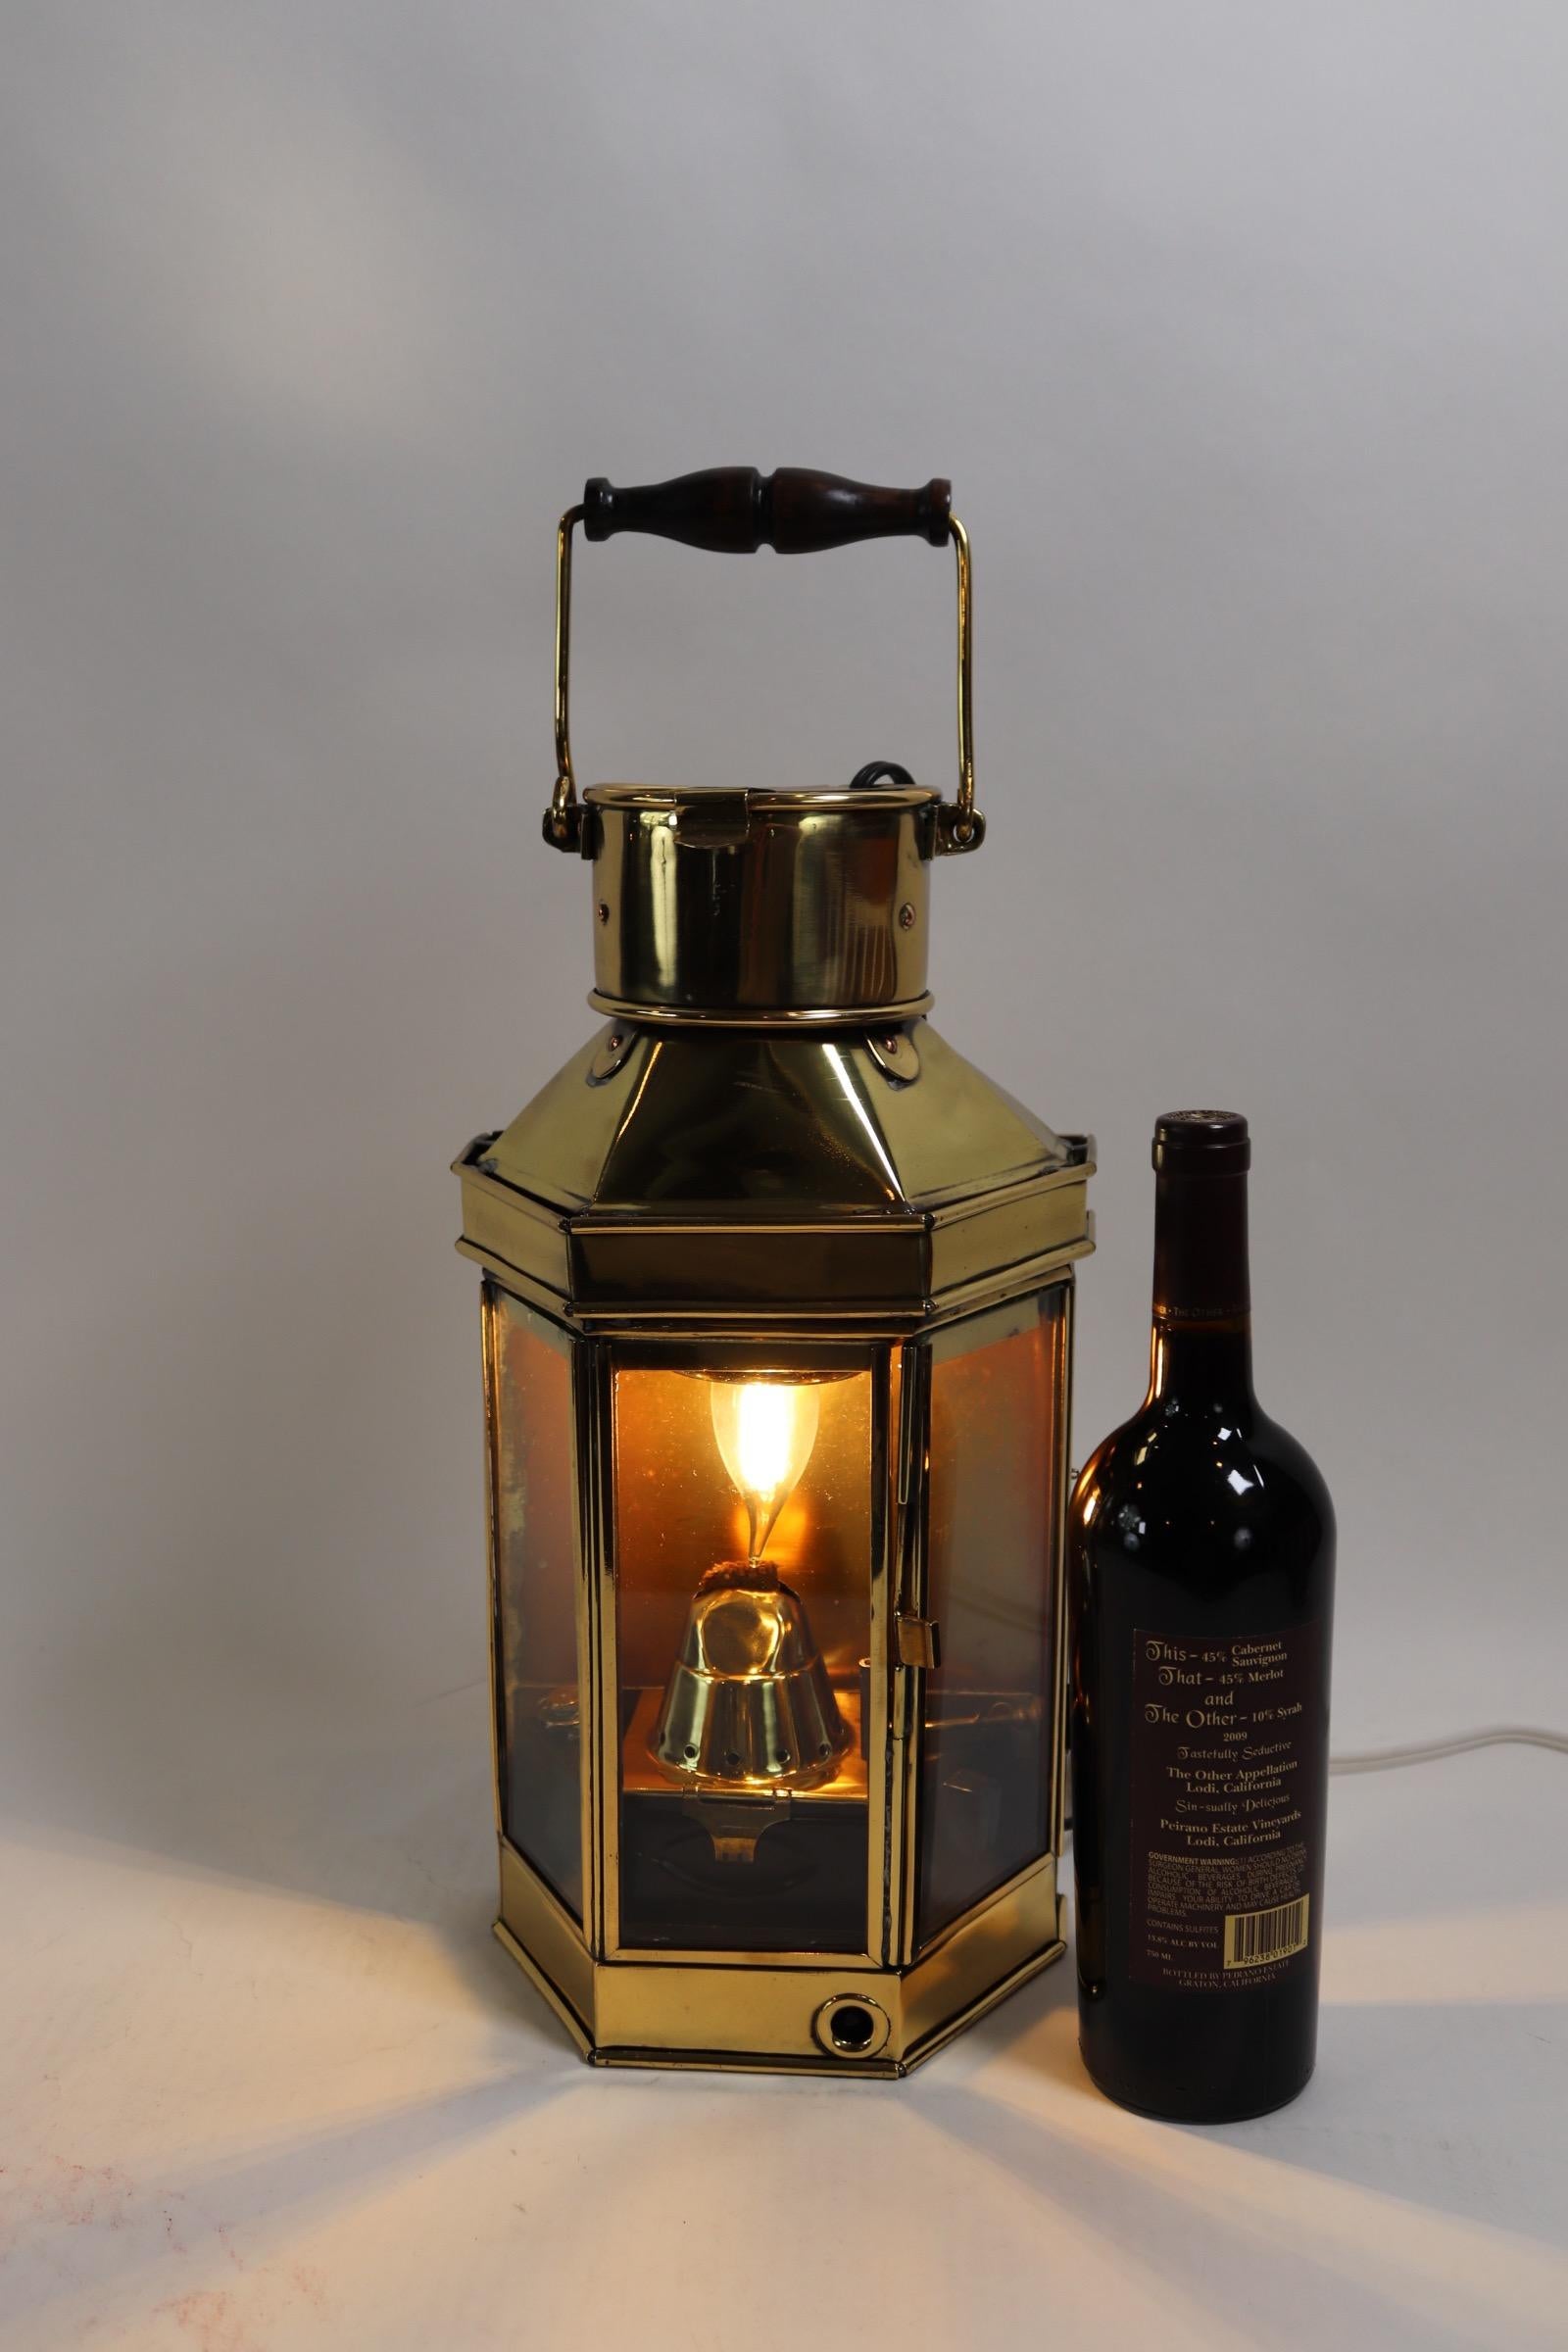 Solid Brass Ships Cabin Lantern by English Maker Bulpitt In Good Condition For Sale In Norwell, MA